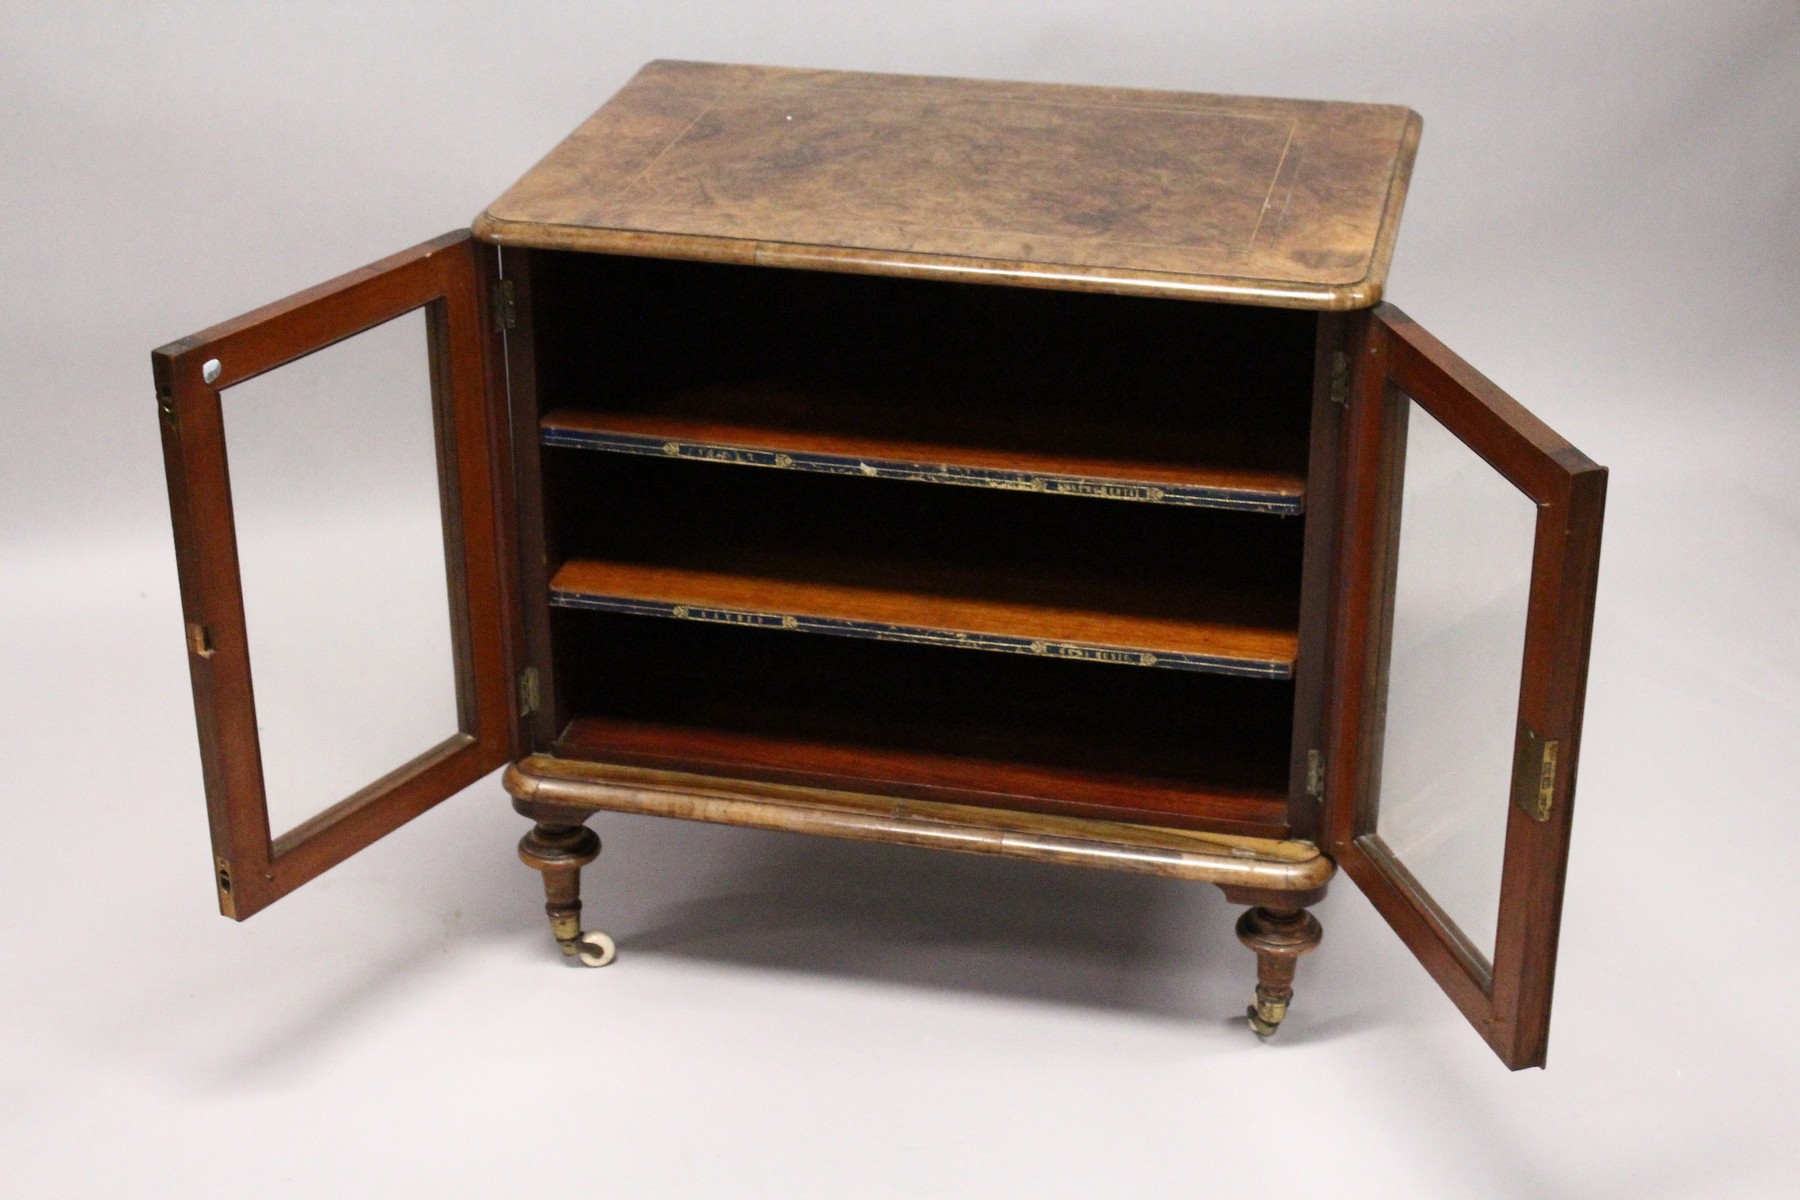 A VICTORIAN WALNUT LOW TWO DOOR MUSIC CABINET, with two shelves, on turned feet. 2ft 3ins wide x 2ft - Image 4 of 4